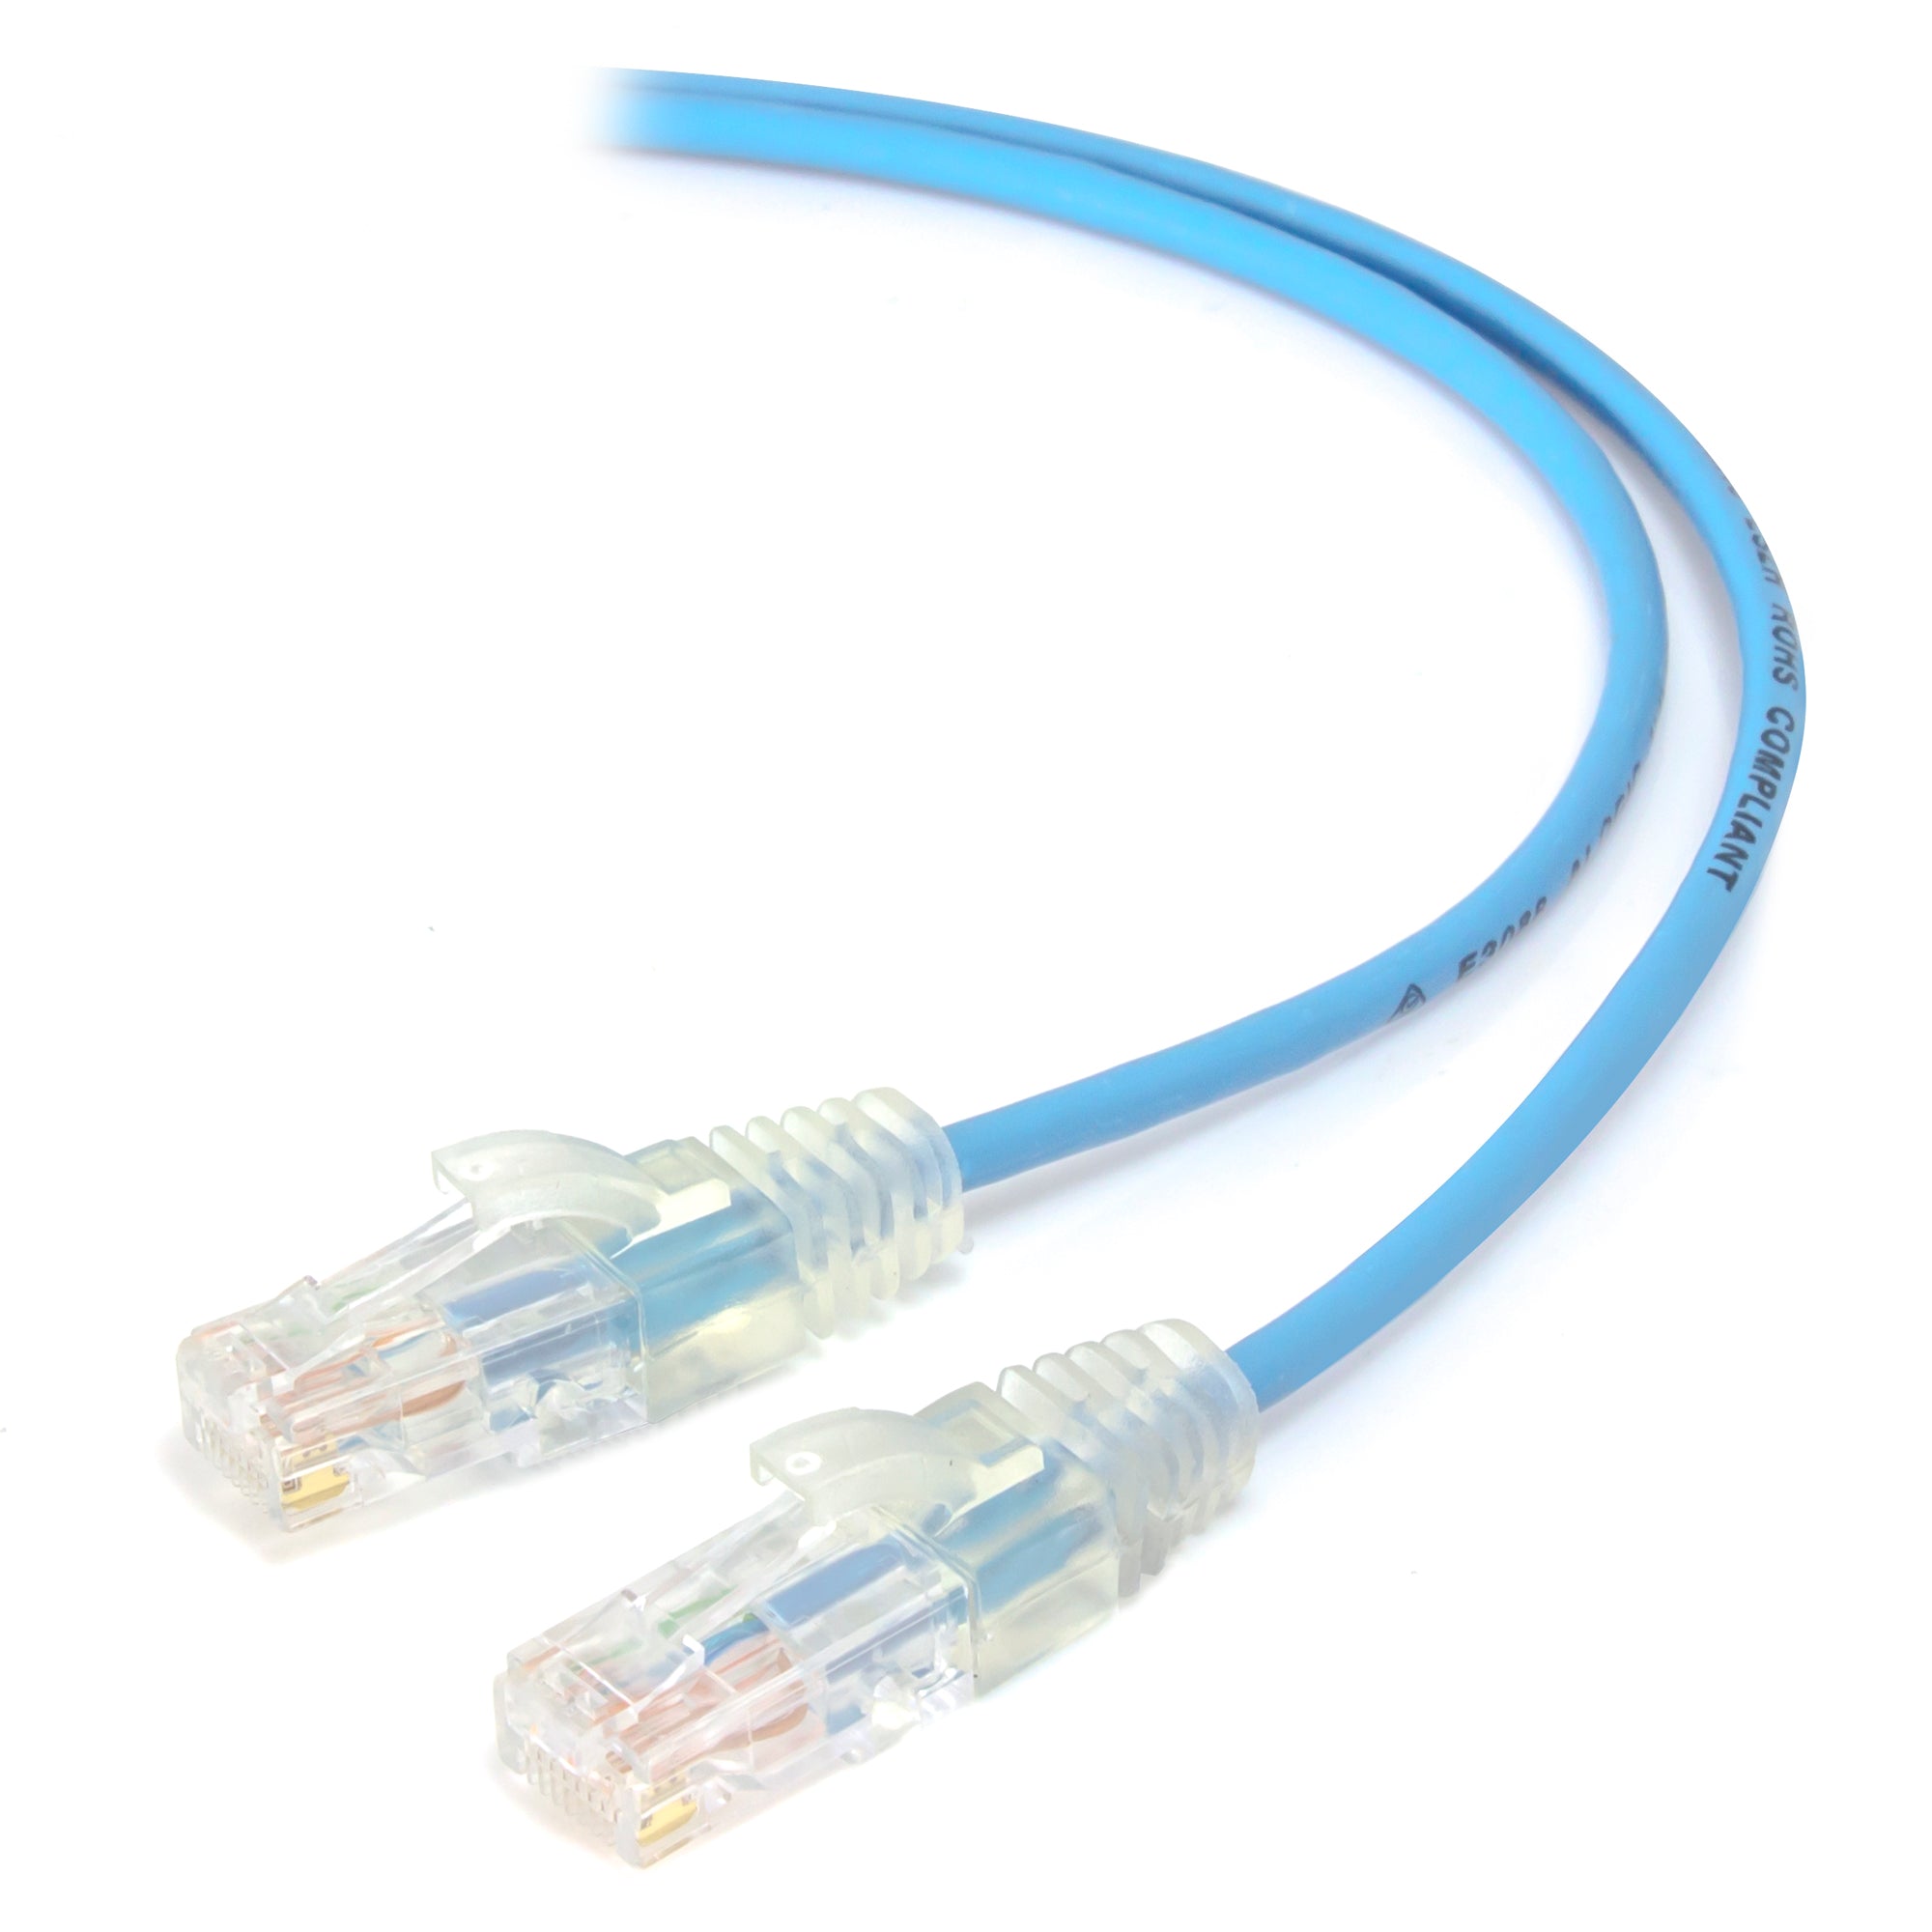 0.30m Blue Ultra Slim Cat6 Network Cable, UTP, 28AWG